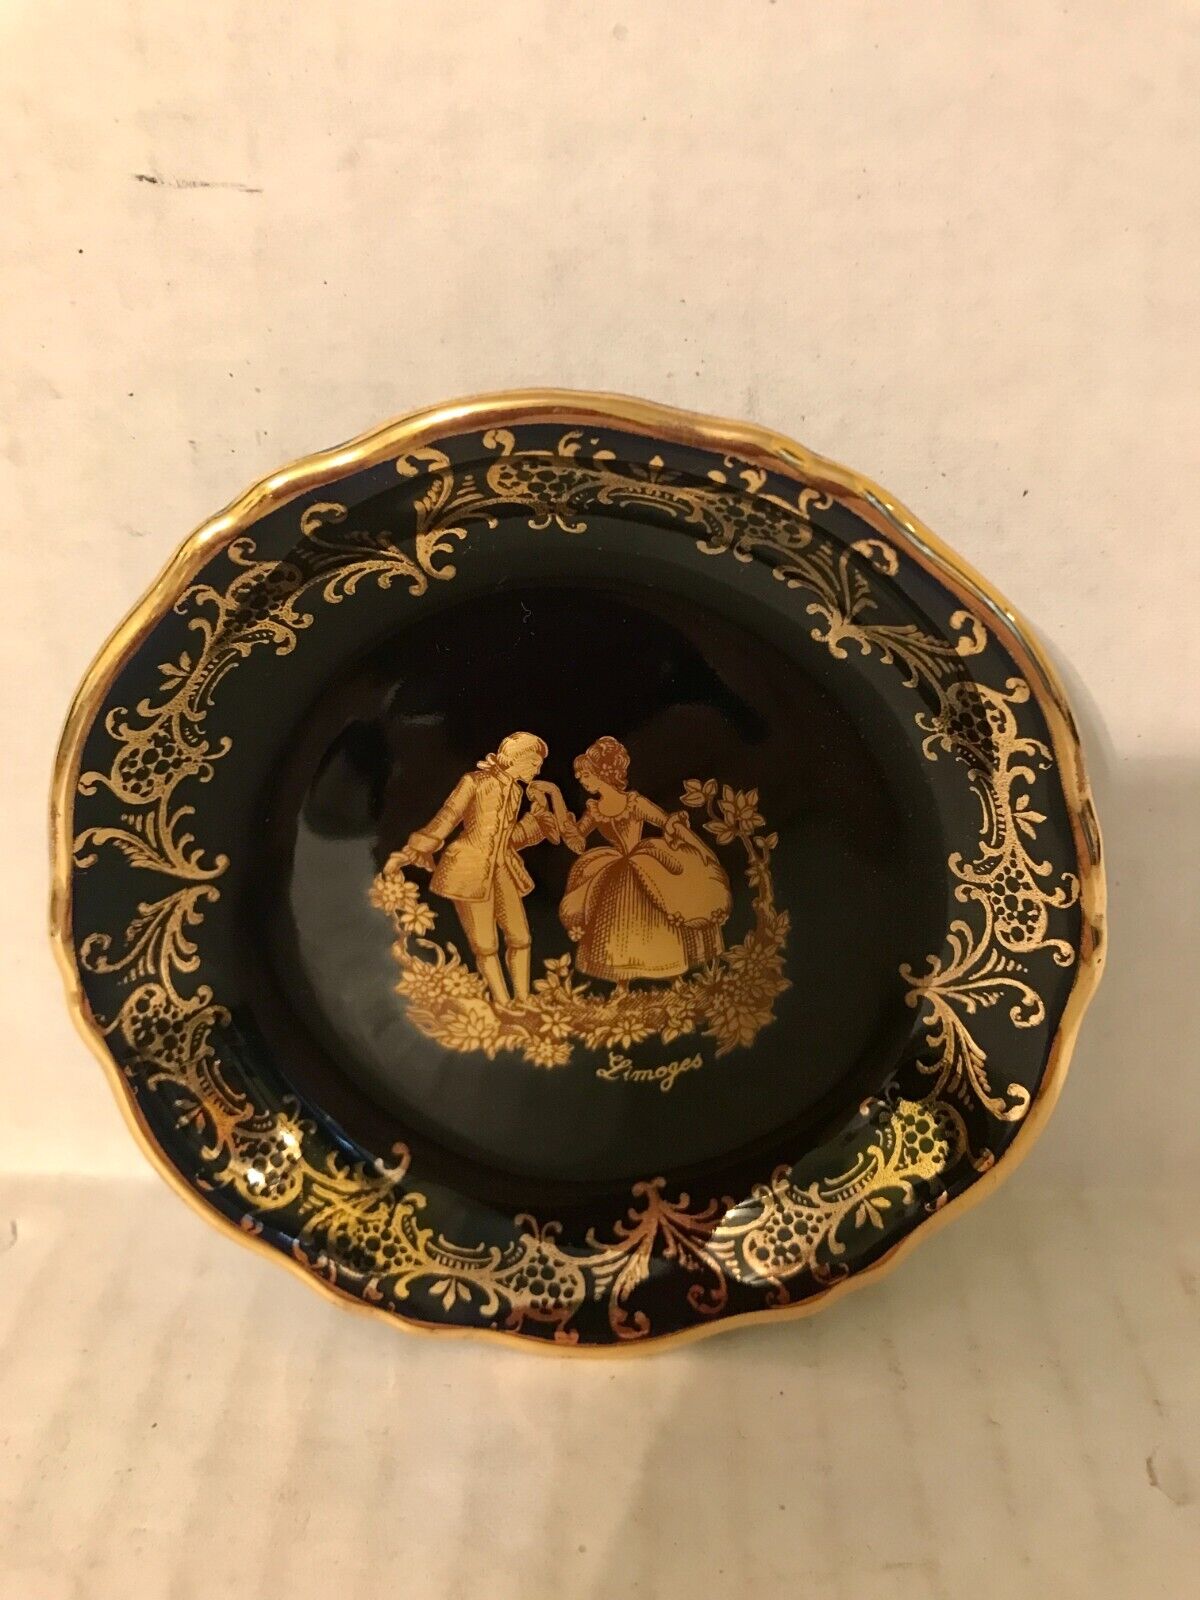 VINTAGE LIMOGES PORCELAINE CASTEL FRANCE BLACK AND GOLD SMALL PLATE OR PIN TRAY